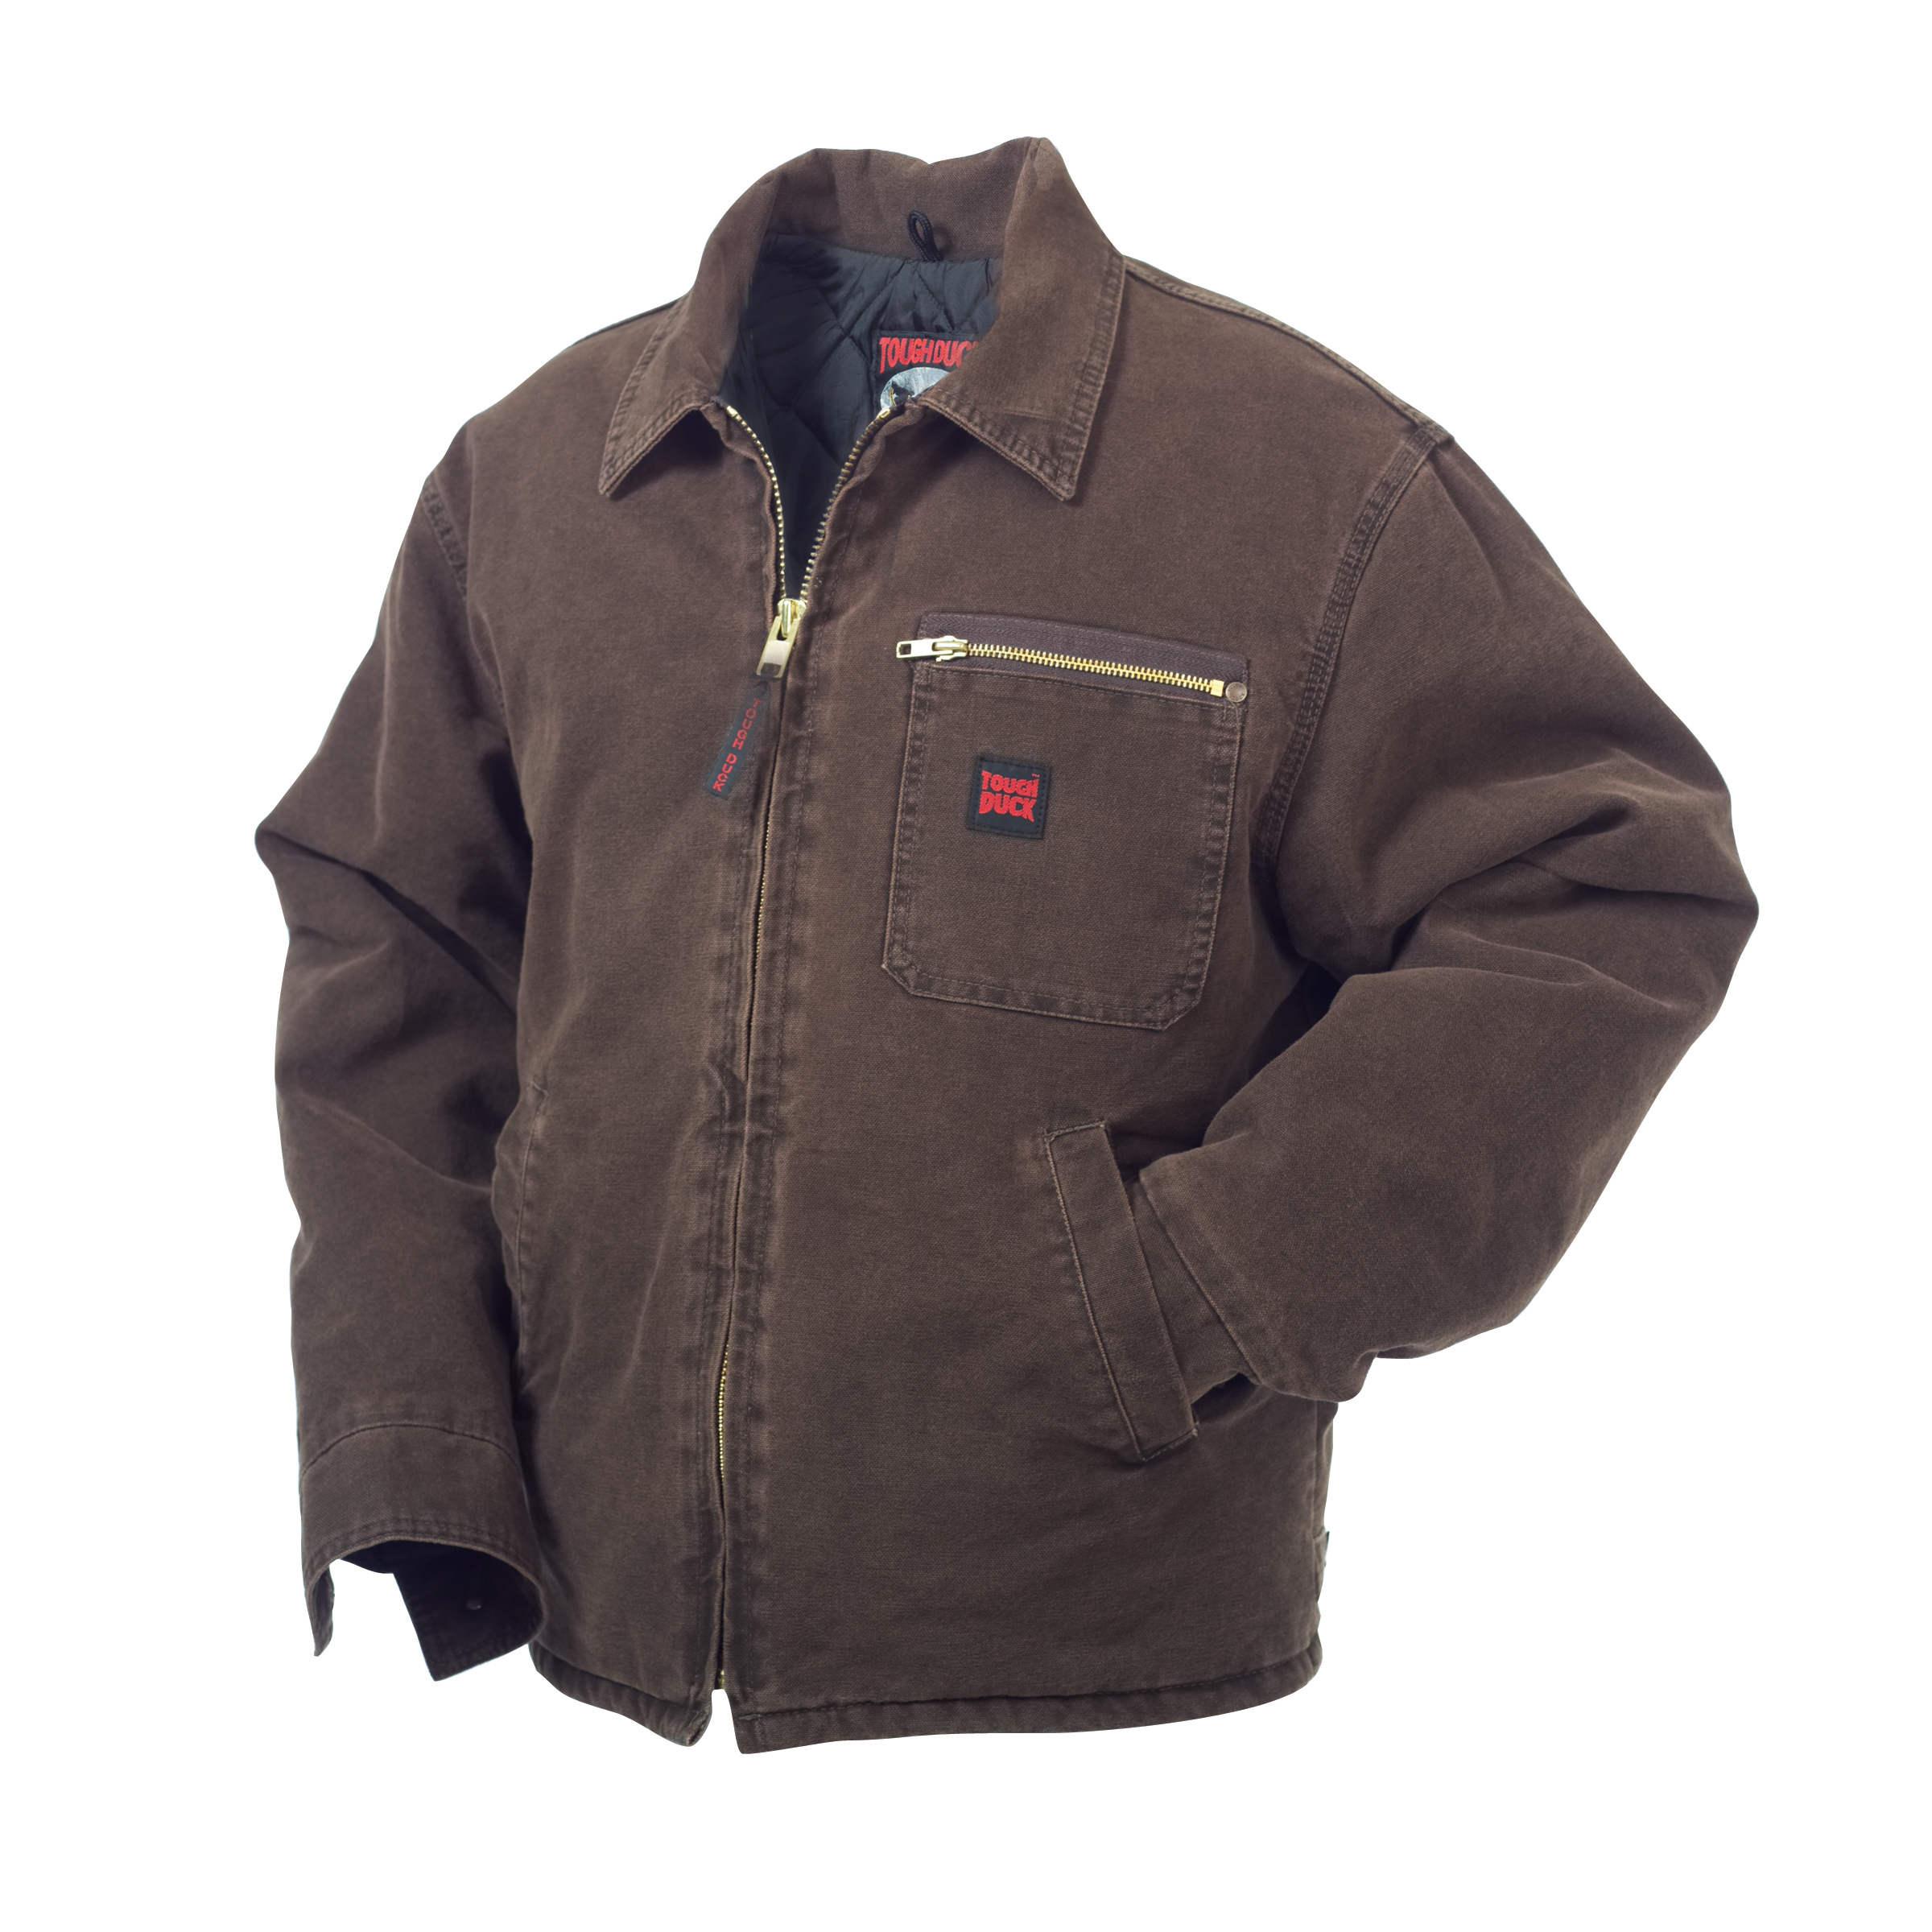 Tough Duck Men's Big & Tall Washed work jacket